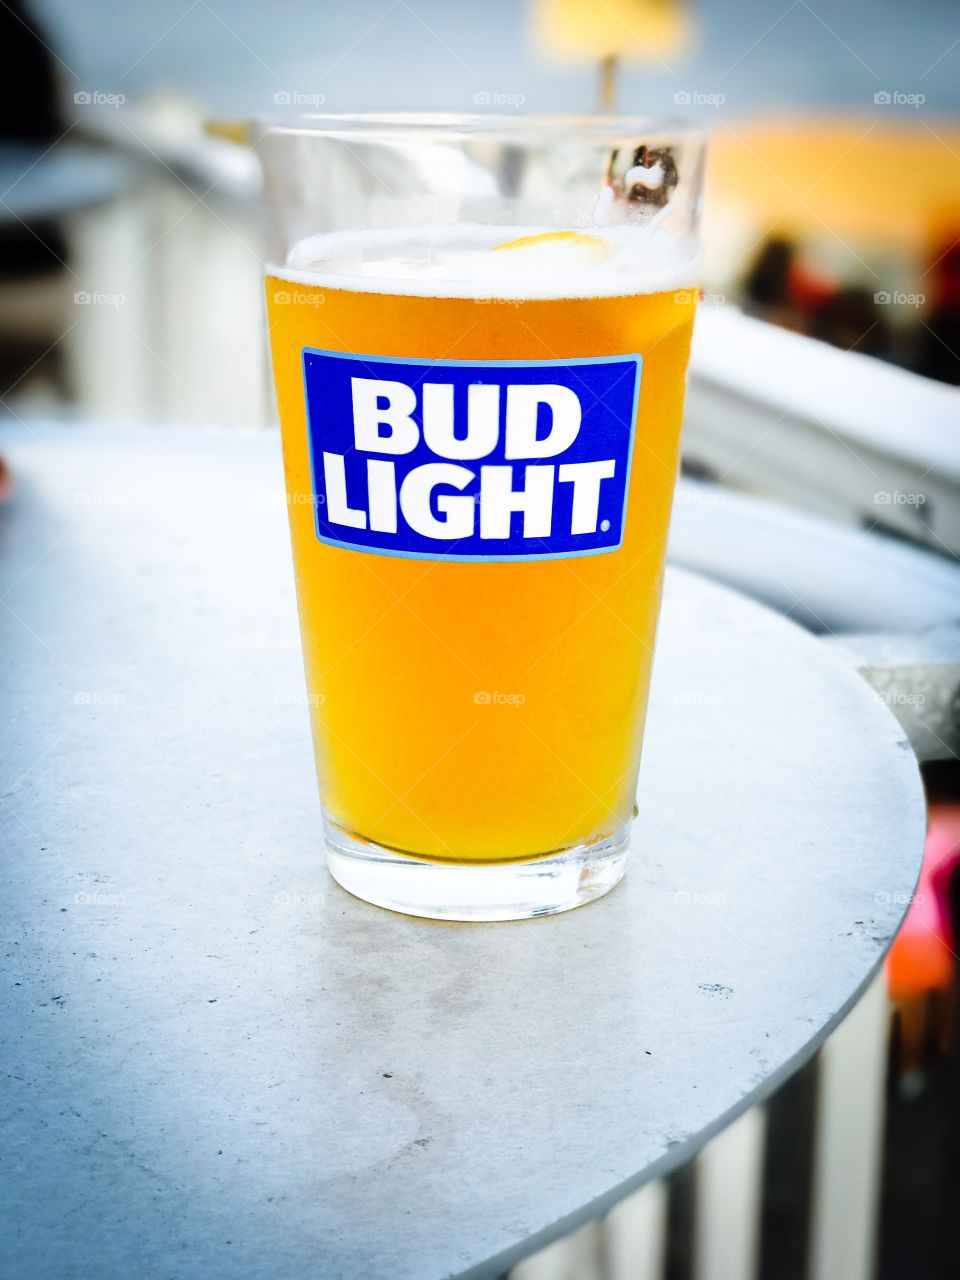 Bud-light is always there to remind you "it's 5o'clock somewhere"